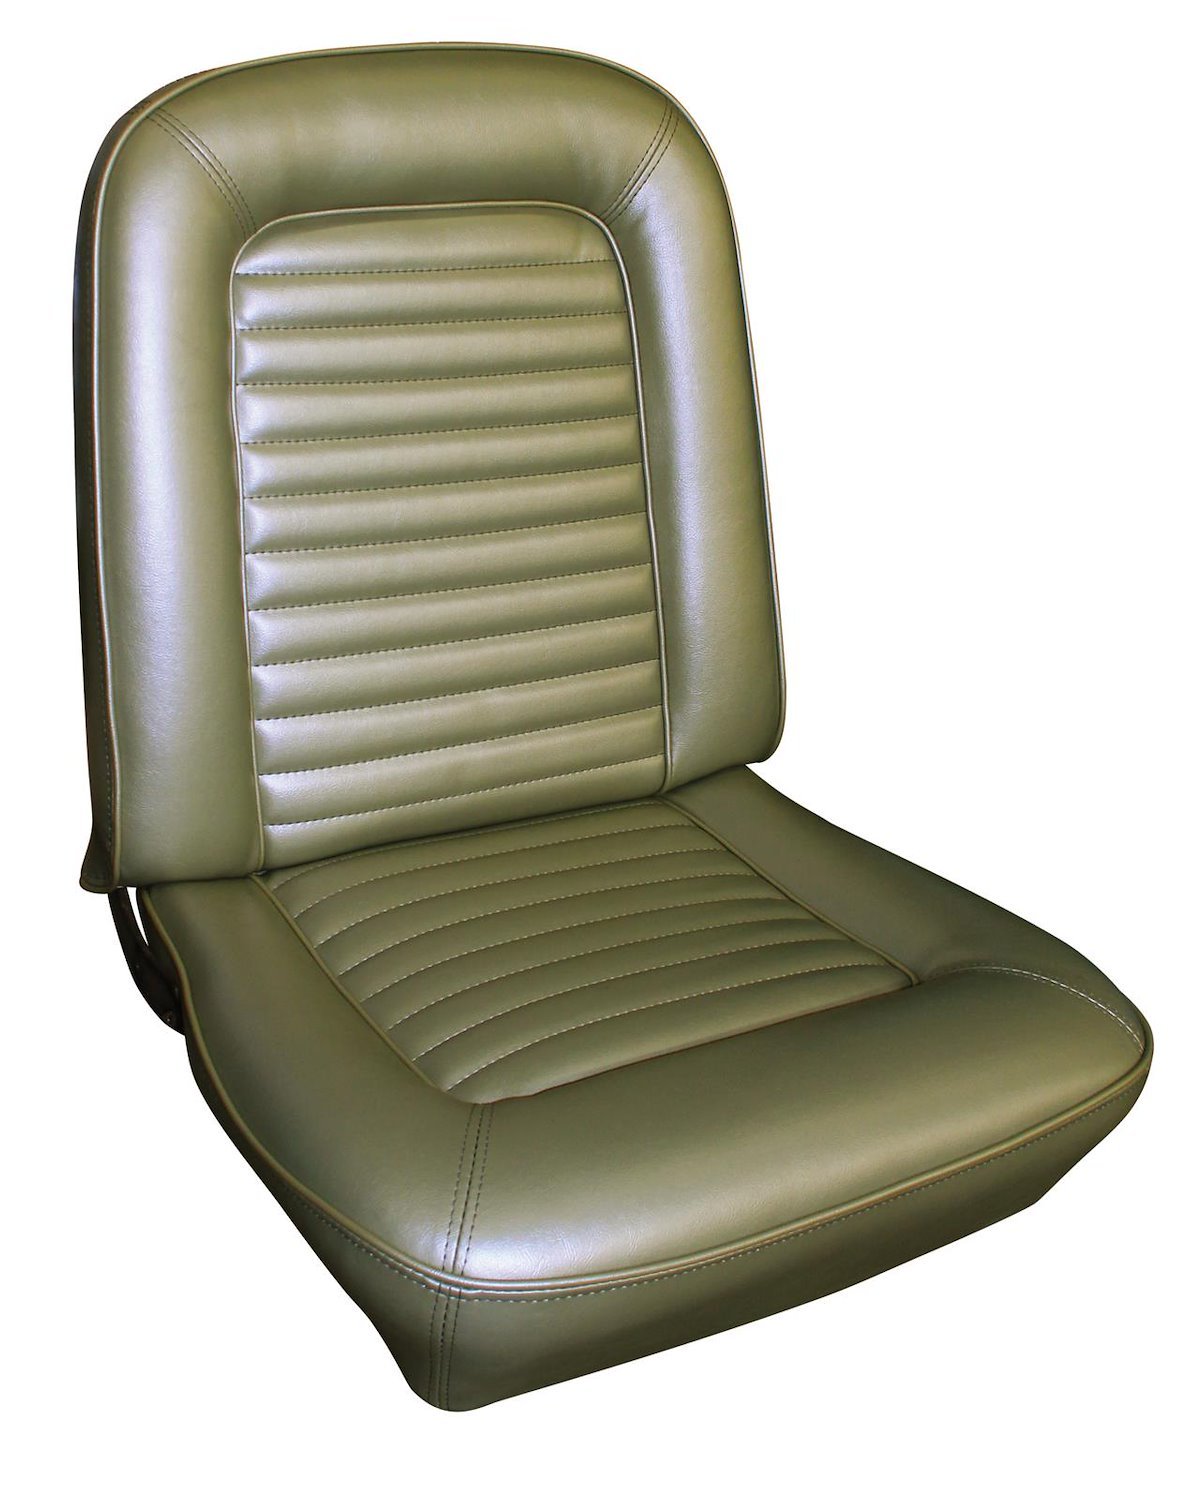 1967 Ford Mustang Deluxe Interior Front Bench Seat Upholstery Set